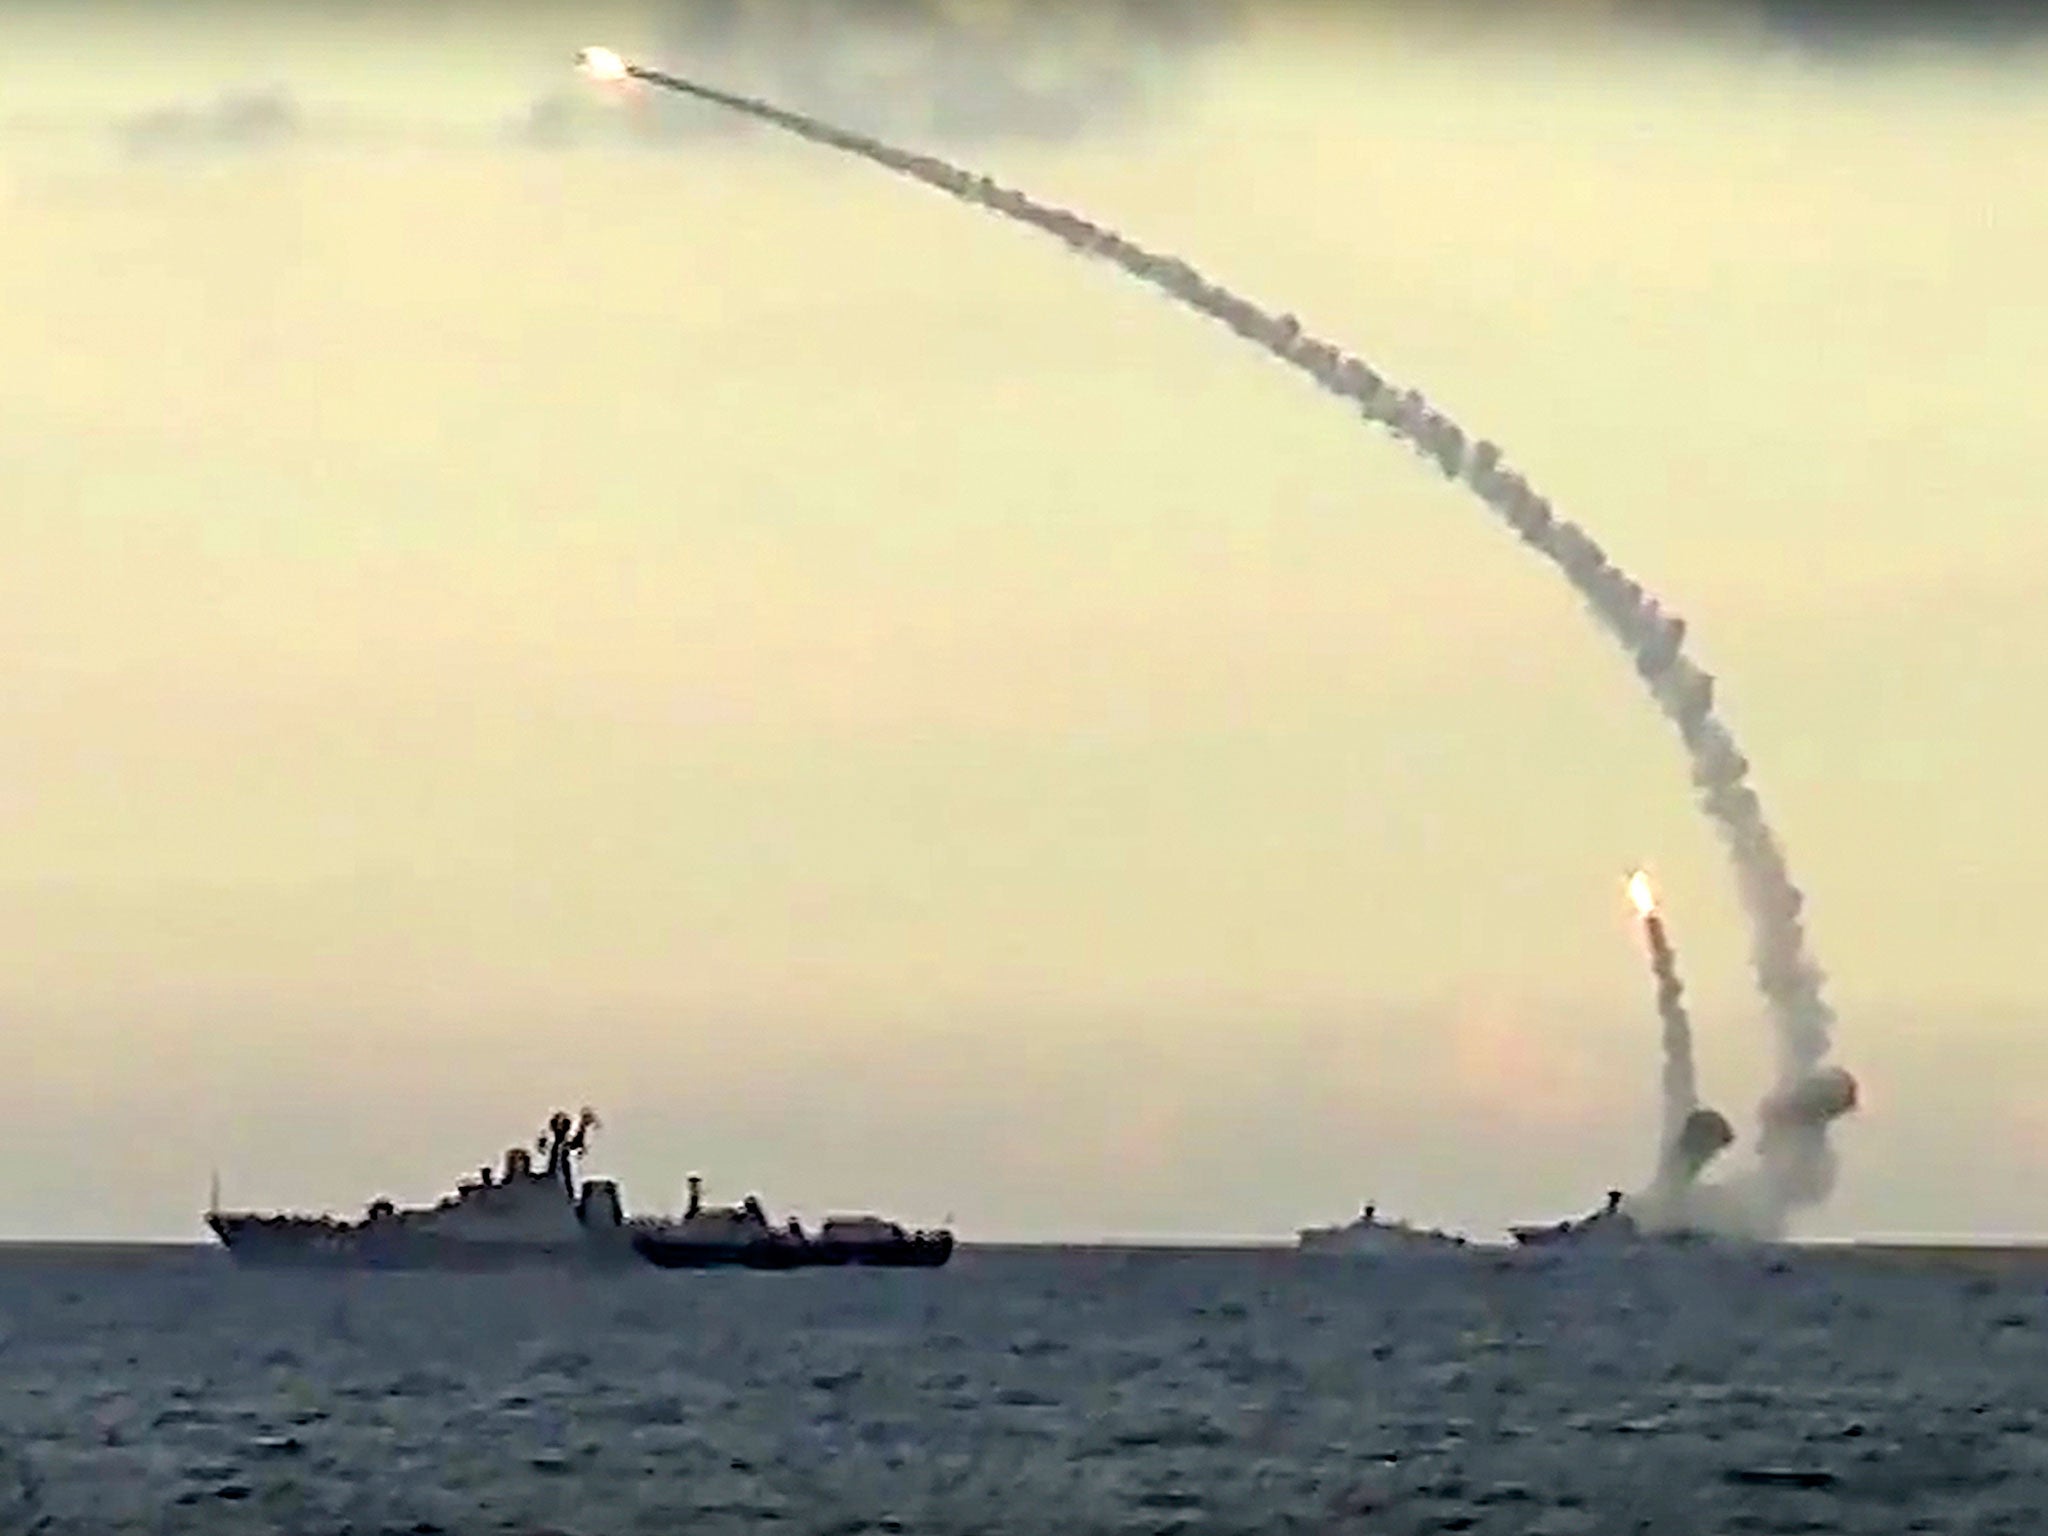 Russian navy ships launch cruise missiles at targets in Syria from the Caspian Sea, according to information released by the Defense Ministry